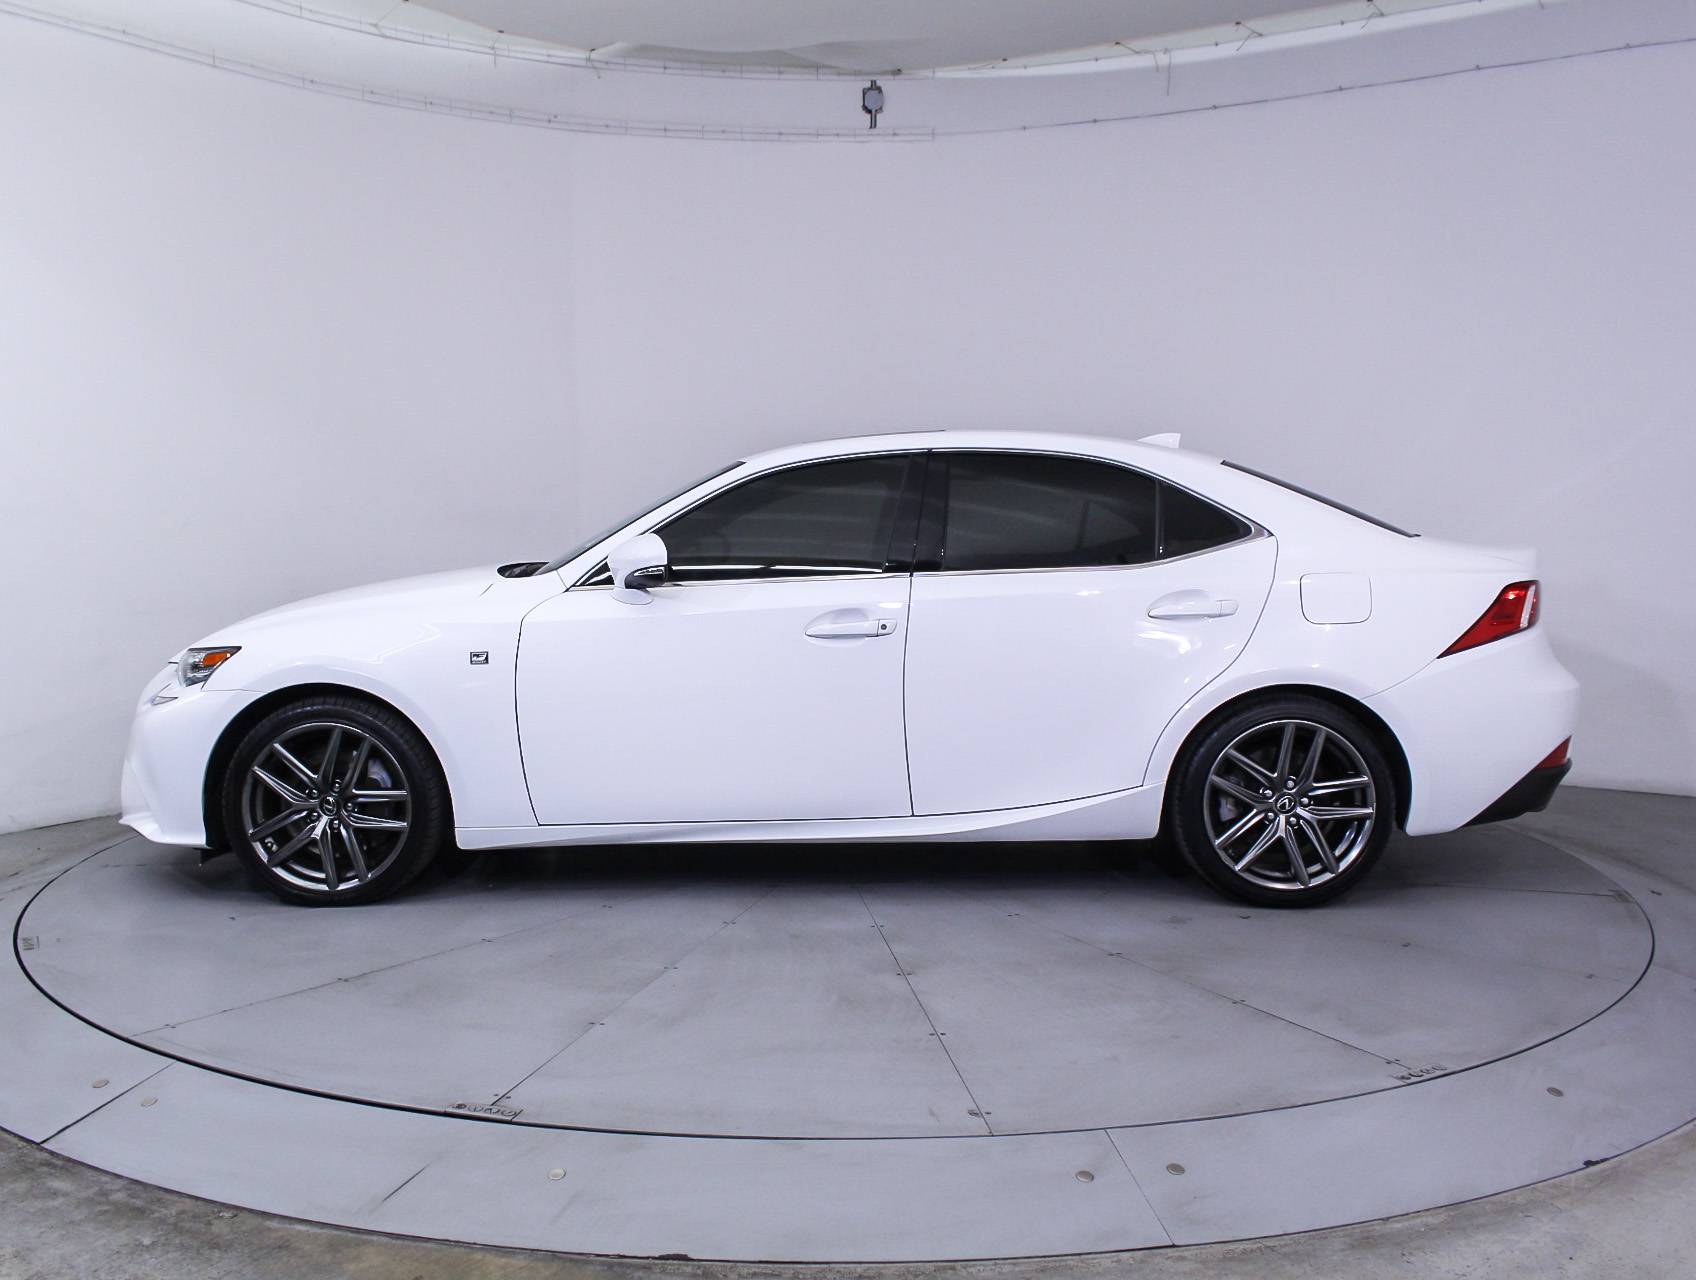 Used 2016 LEXUS IS 350 F Sport for sale in MIAMI | 85046